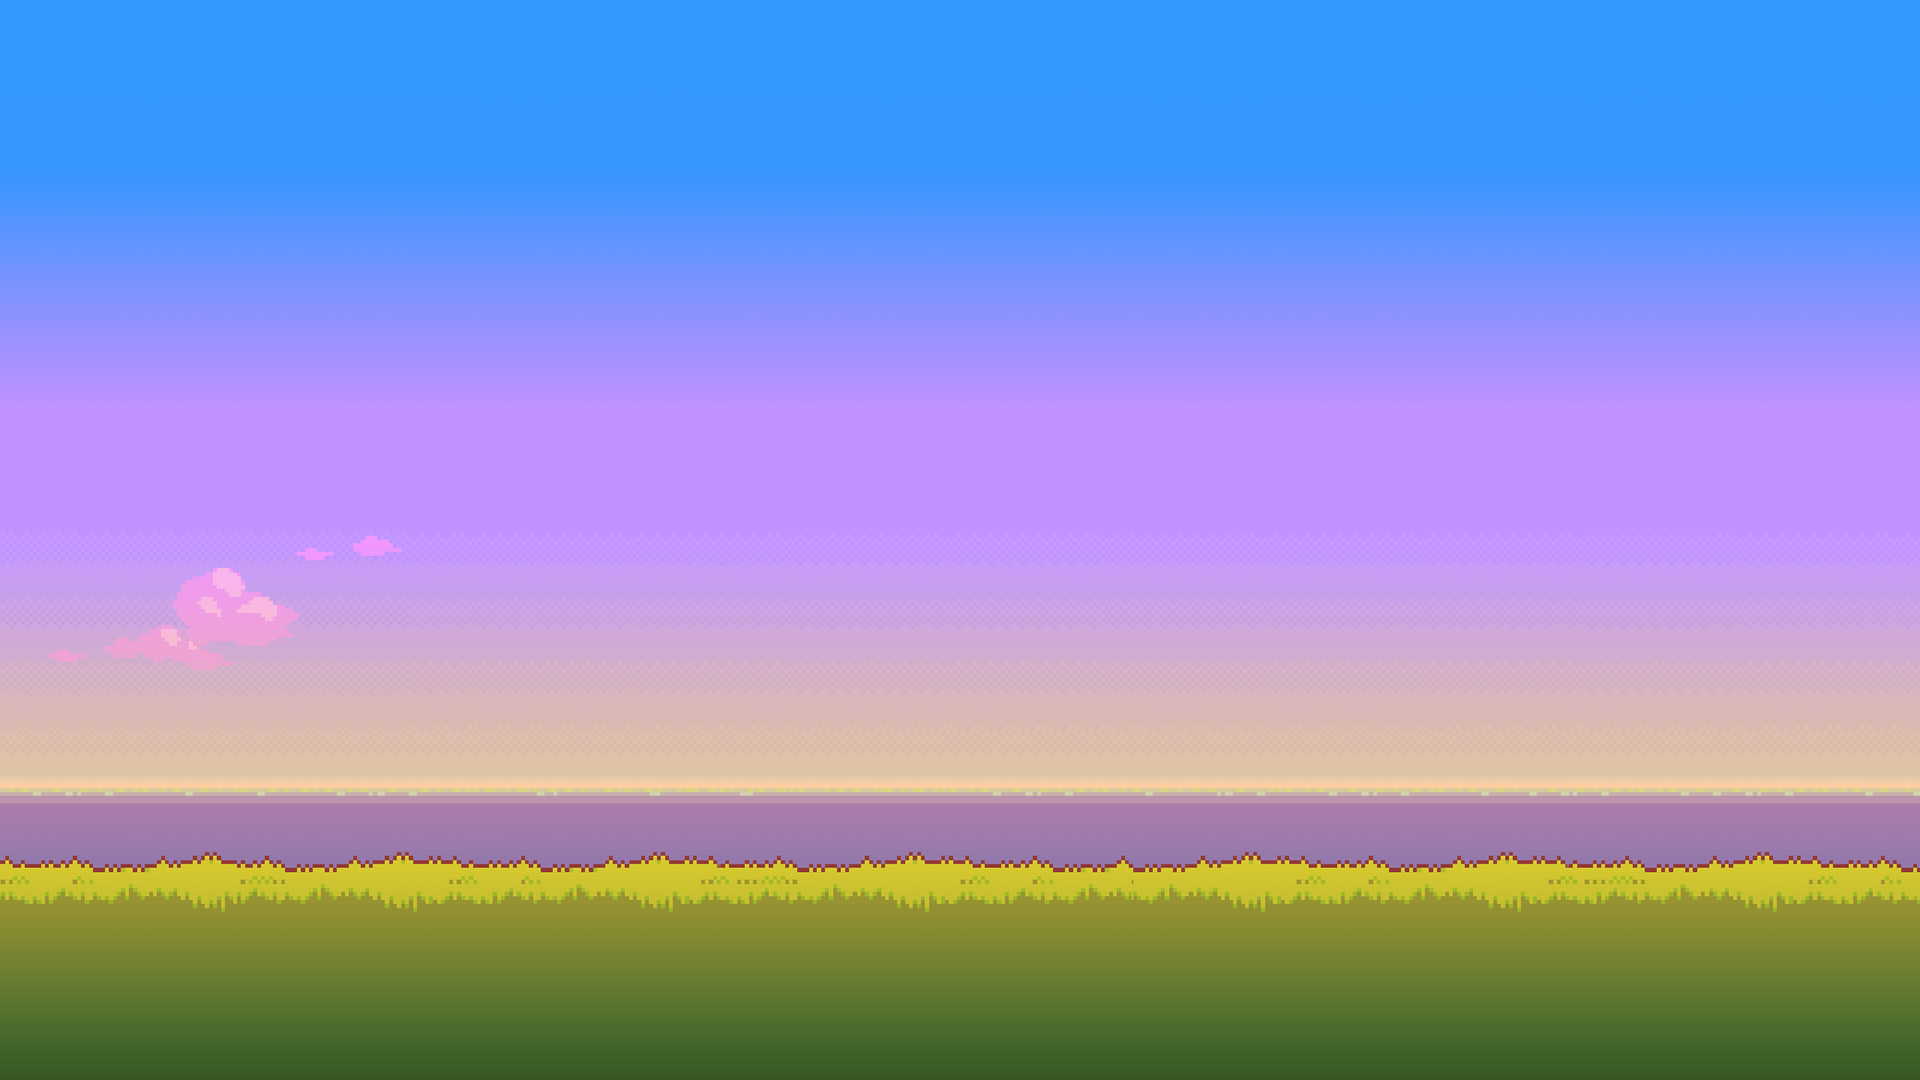 UPDATE: New version of the '8Bit Day' Wallpapers Set. Pixel wallpapers changes based on time of day! [Download different resolutions and installation instructions in comments.]